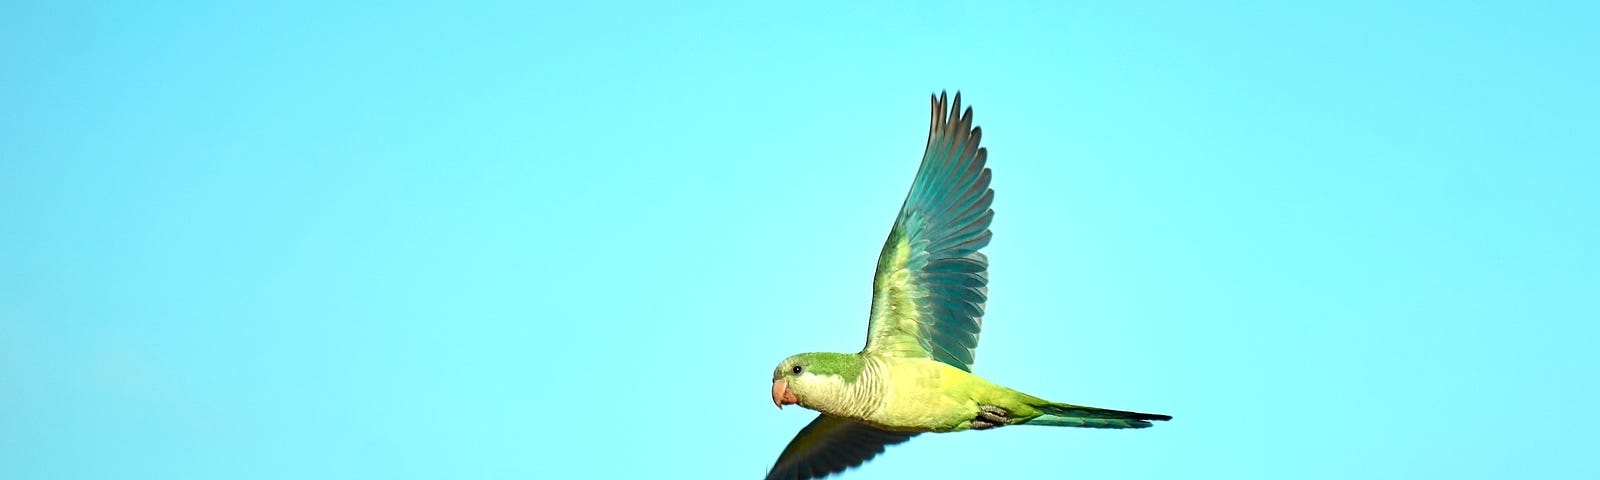 A parrot flying in a bright blue sky